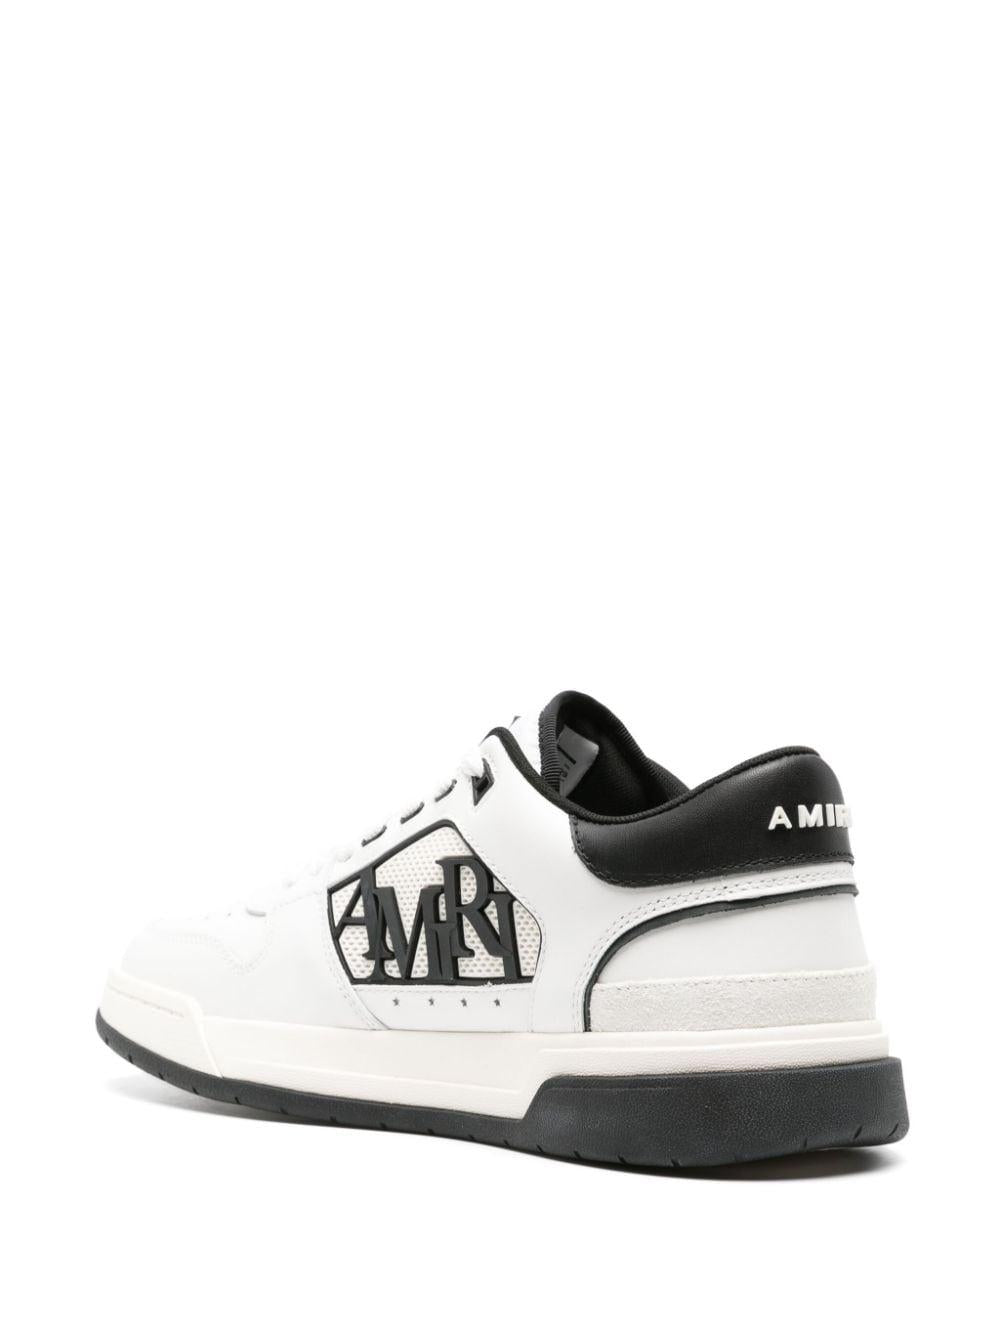 AMIRI Classic Low Sneakers for Men in White and Black